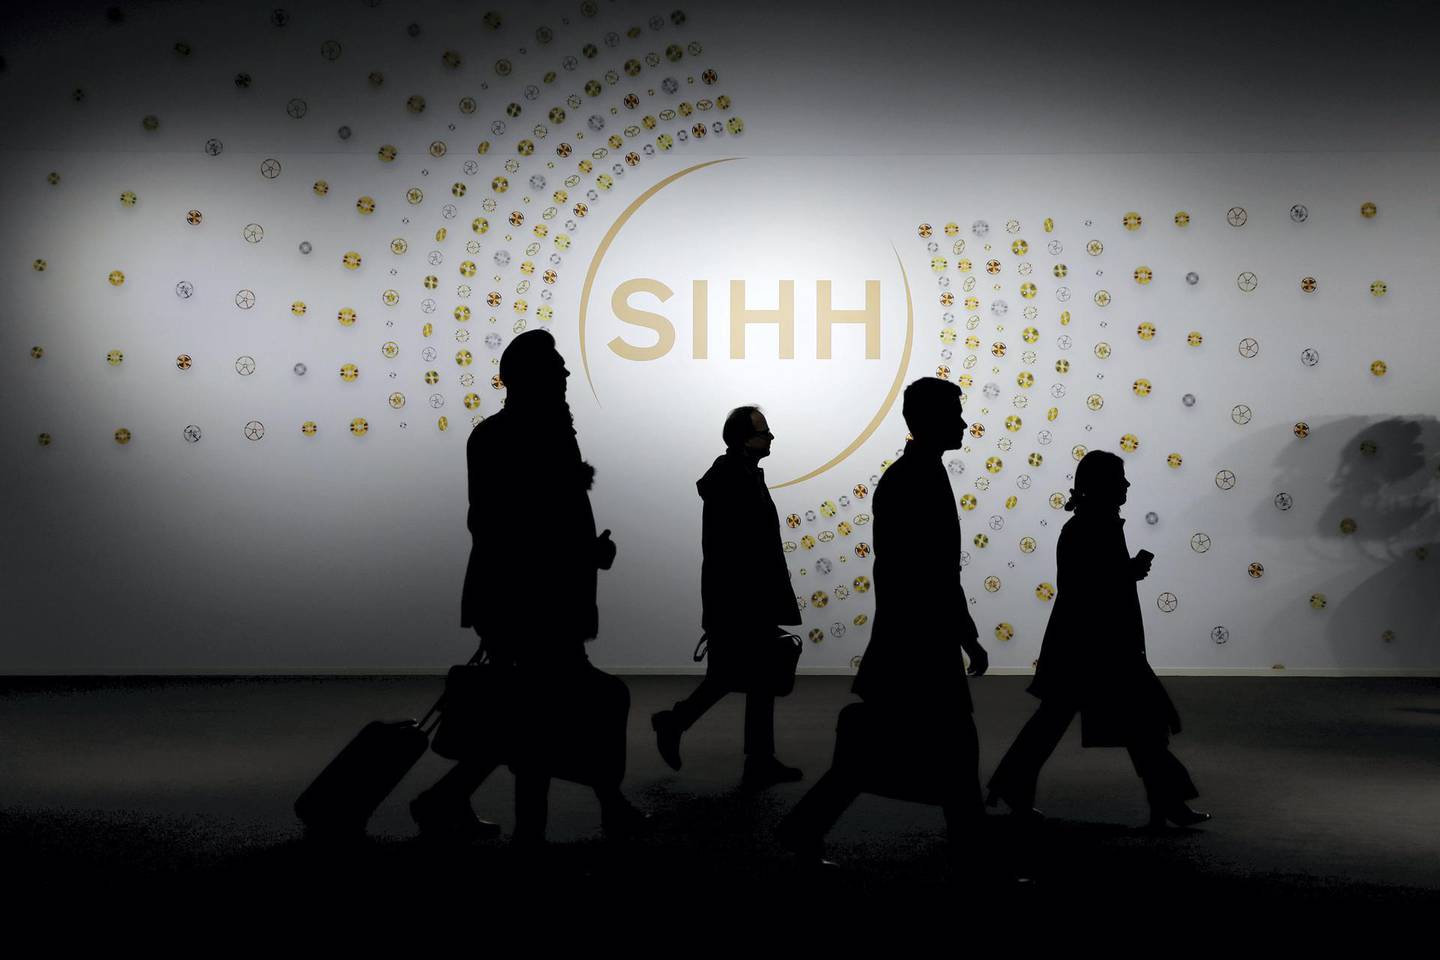 Visitors pass a show logo as they arrive for the Salon International de la Haute Horlogerie (SIHH) in Geneva, Switzerland, on Tuesday, Jan. 15, 2019. The elephant in the room at this week’s Swiss watch fair in Geneva is that the industry is still struggling to find buyers for all the timepieces it has produced over the years. Photographer: Stefan Wermuth/Bloomberg